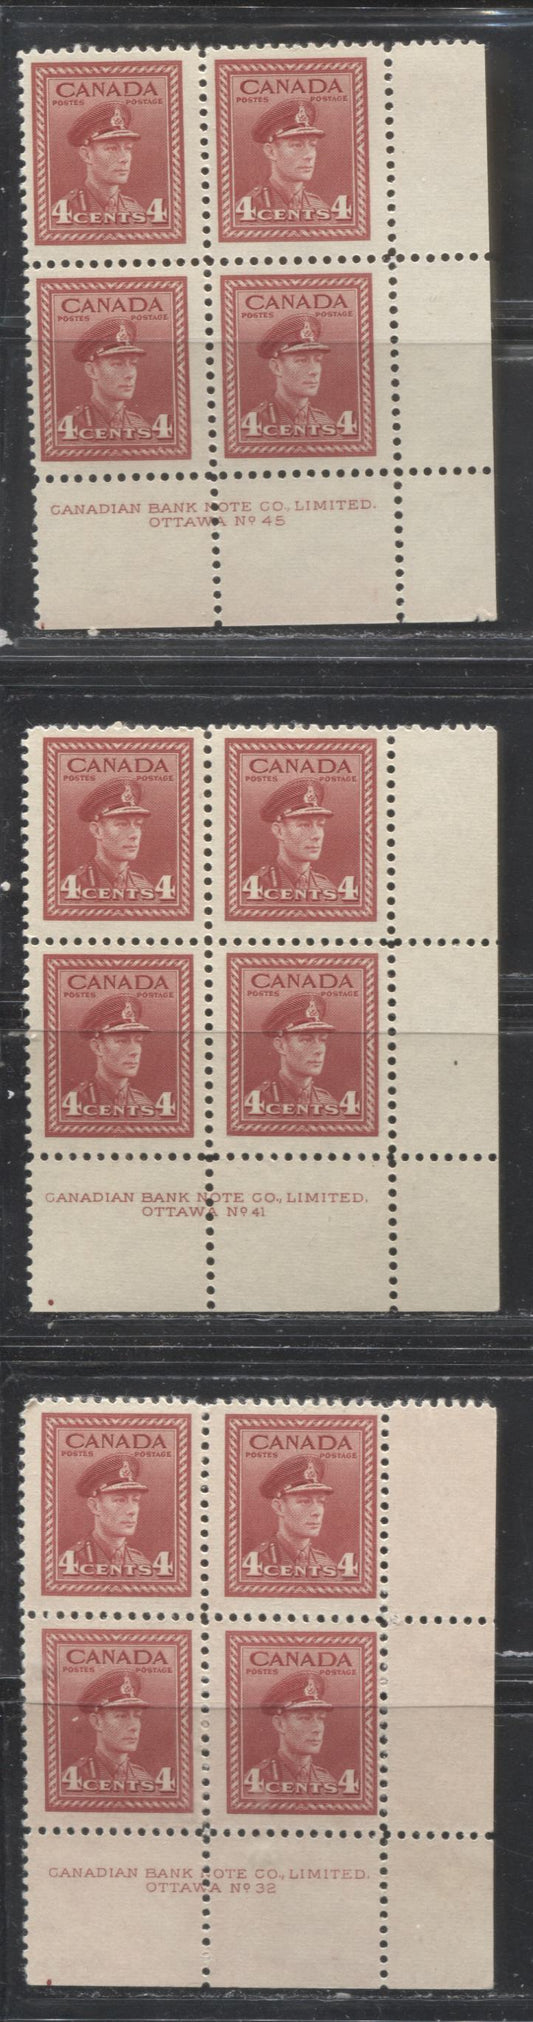 Lot 48 Canada #254 4c Carmine-Red & Deep Carmine Red King George VI  1942-1949 War Issue, Fine NH Plate 32, 41 & 45 Lower Right Blocks of 4 Plate Dot at LL